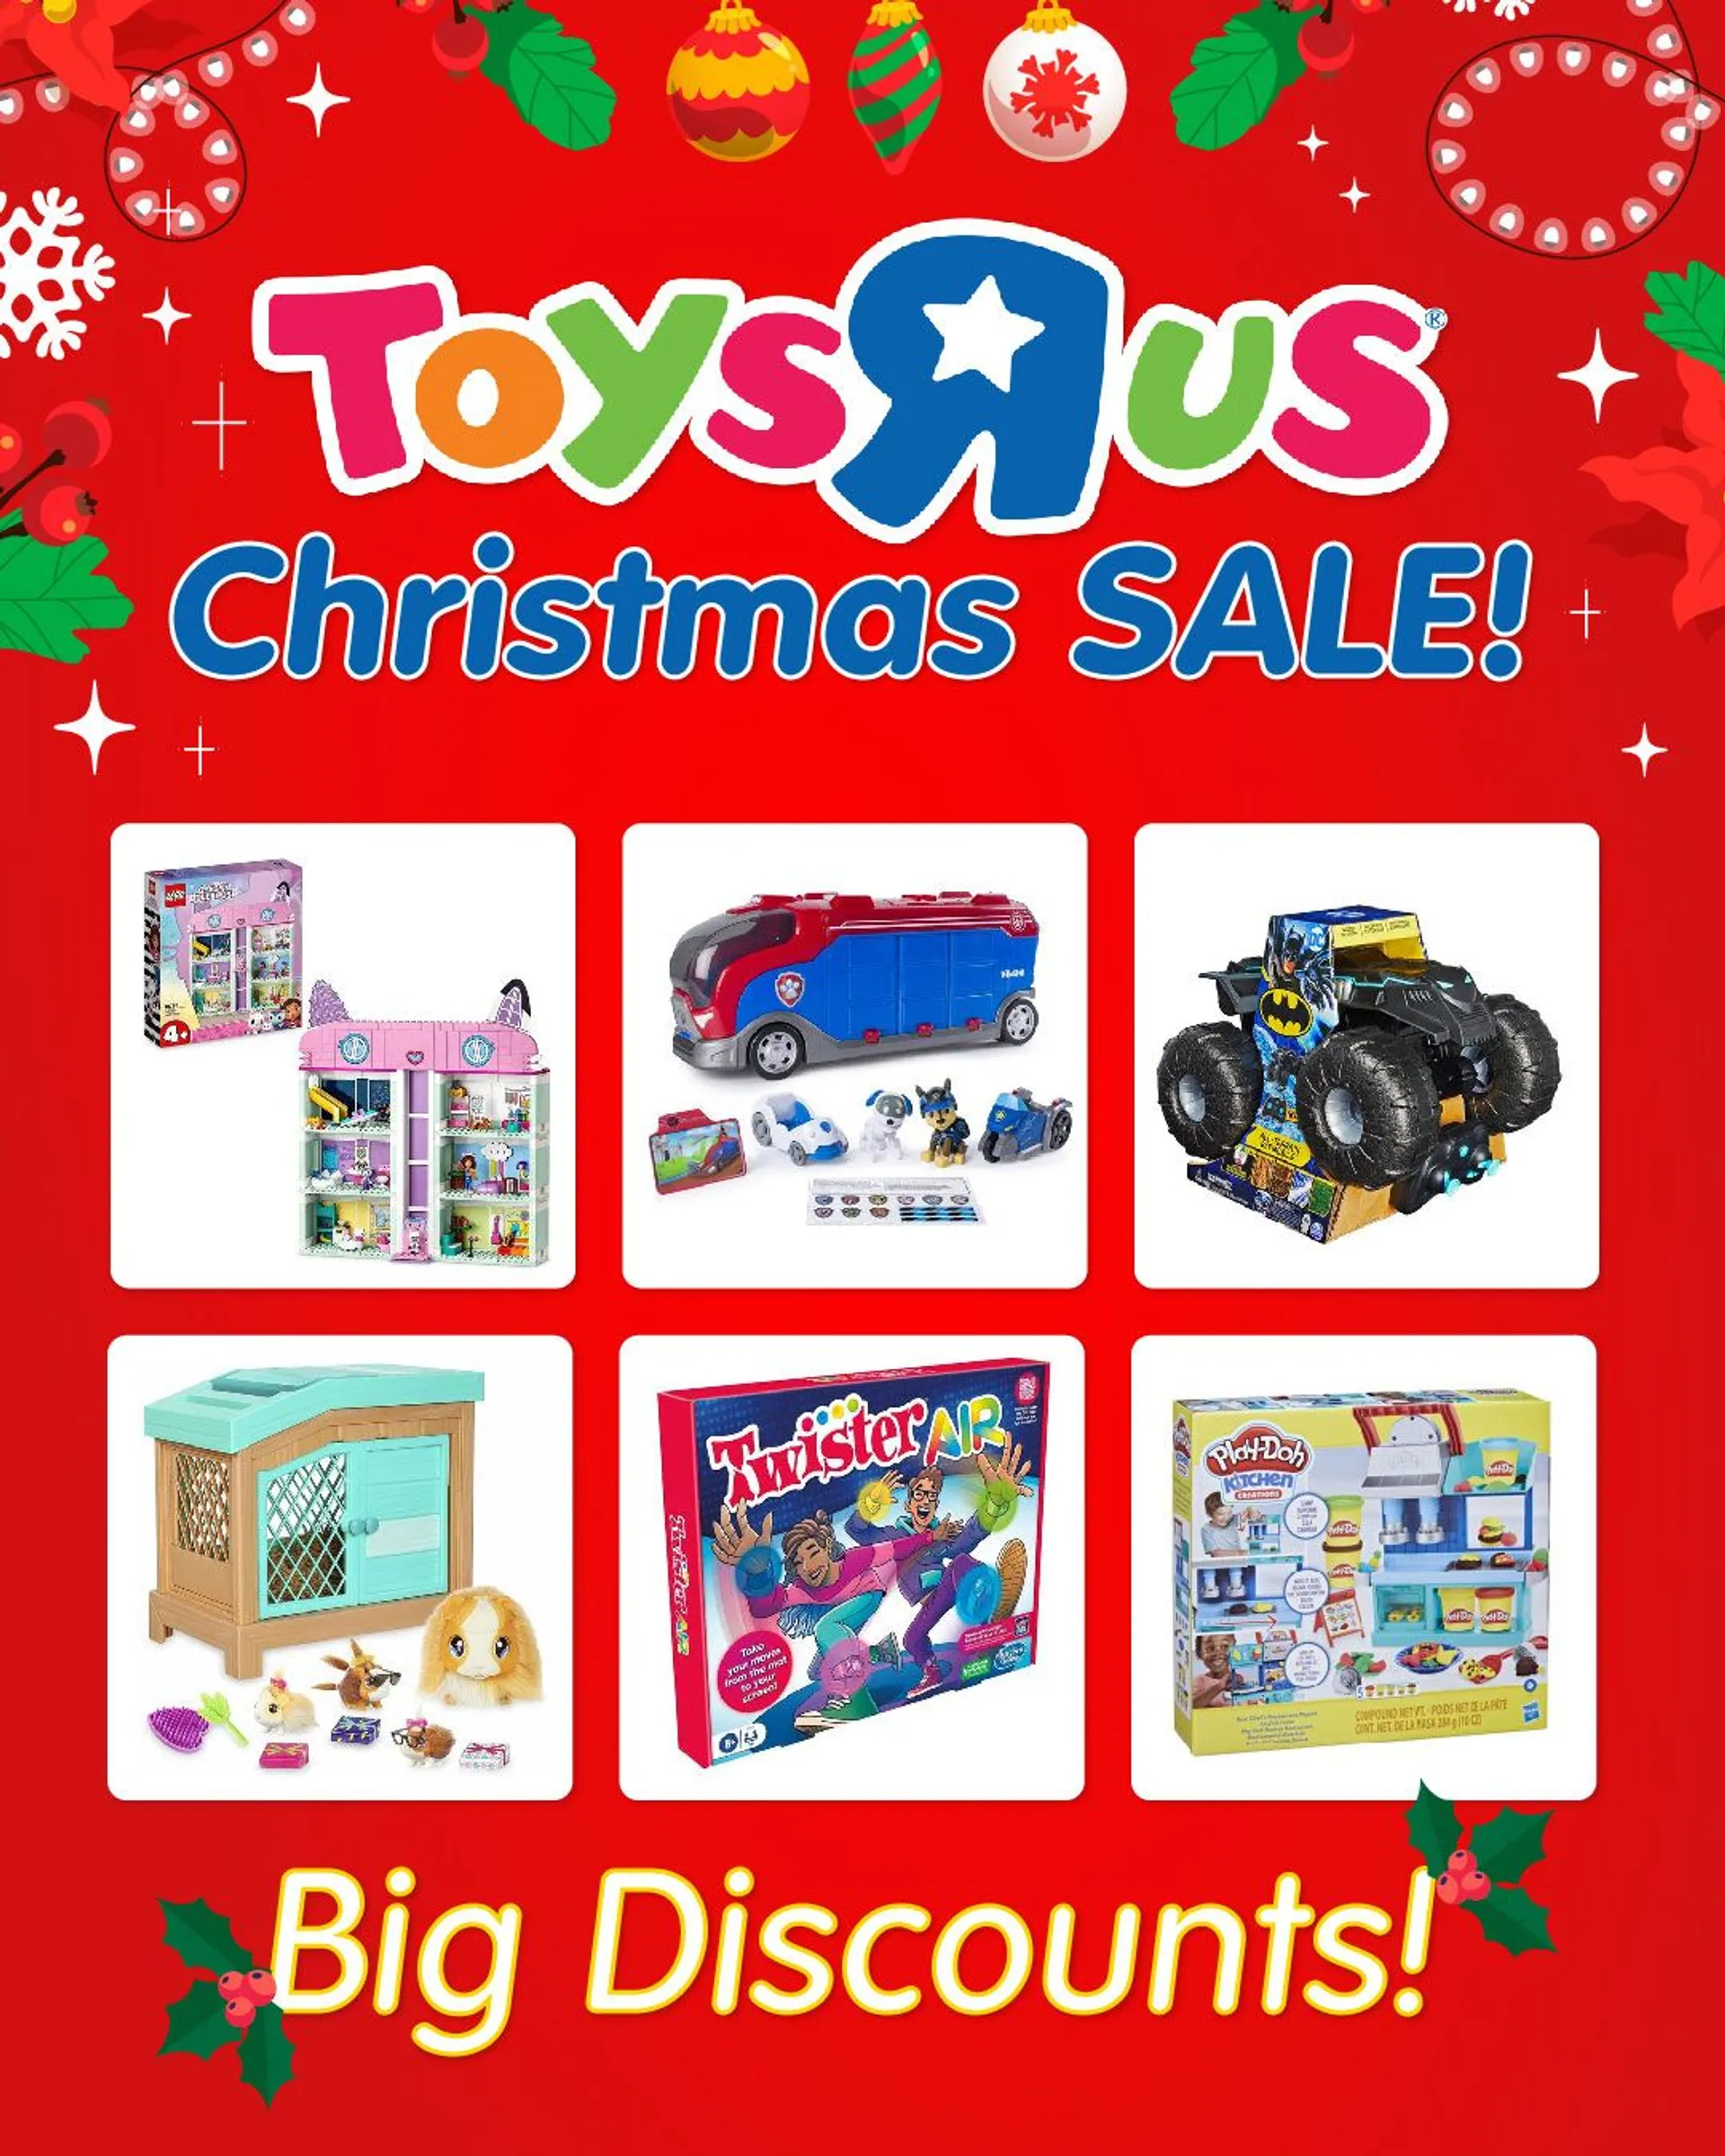 Toy 'R' Us - Christmas sale